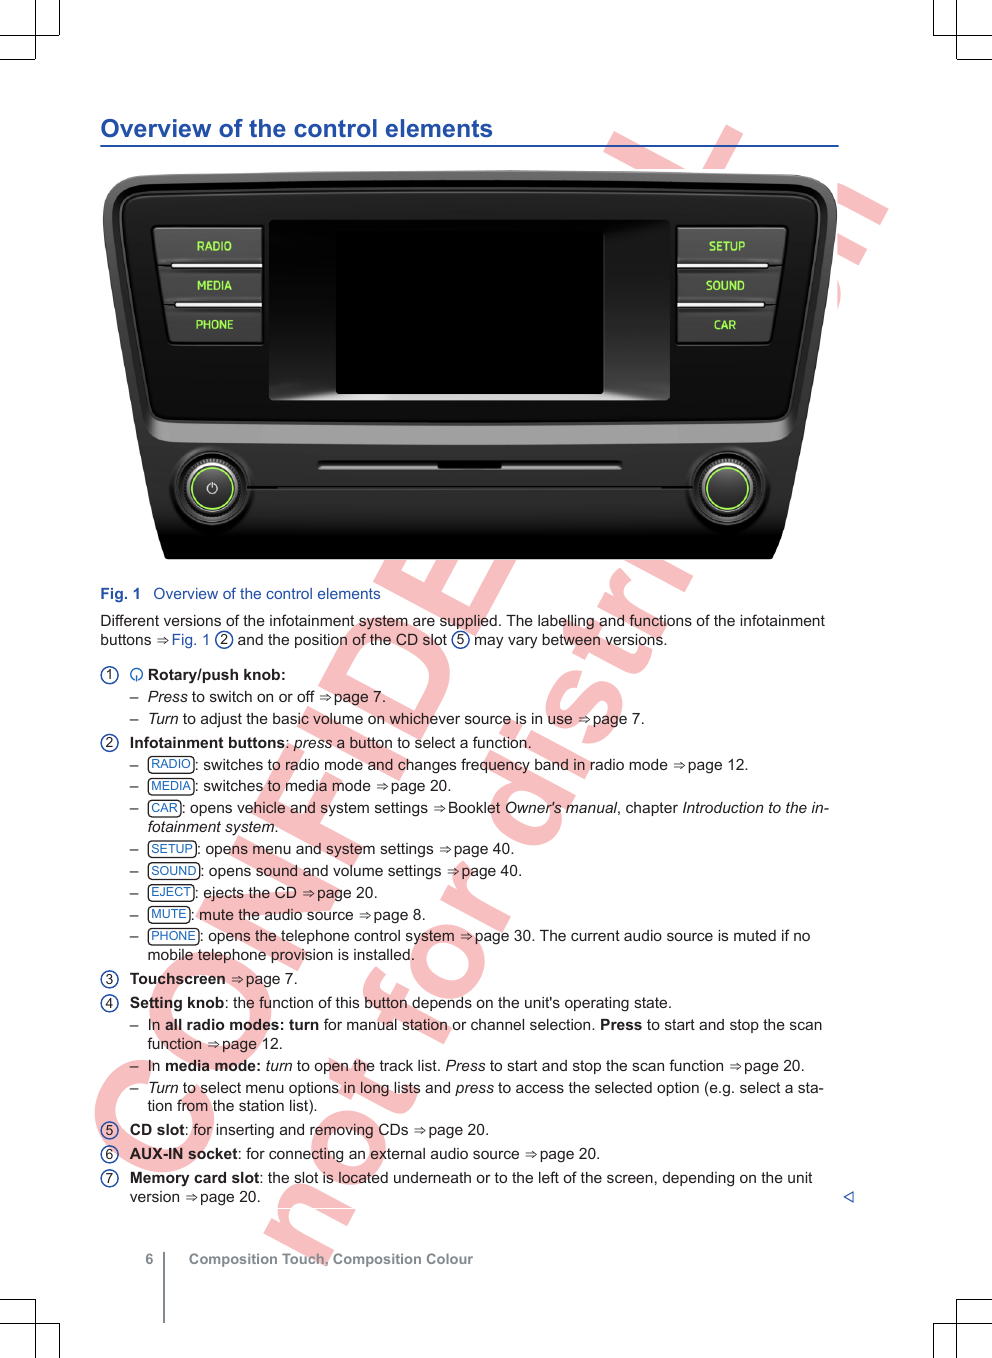  CONFIDENTIAL not for distribution Overview of the control elementsFig. 1  Overview of the control elementsDifferent versions of the infotainment system are supplied. The labelling and functions of the infotainmentbuttons ⇒ Fig. 1  2 and the position of the CD slot  5 may vary between versions. Rotary/push knob:–Press to switch on or off ⇒ page 7.–Turn to adjust the basic volume on whichever source is in use ⇒ page 7.Infotainment buttons: press a button to select a function.–RADIO : switches to radio mode and changes frequency band in radio mode ⇒ page 12.–MEDIA : switches to media mode ⇒ page 20.–CAR : opens vehicle and system settings ⇒ Booklet Owner&apos;s manual, chapter Introduction to the in-fotainment system.–SETUP : opens menu and system settings ⇒ page 40.–SOUND : opens sound and volume settings ⇒ page 40.–EJECT : ejects the CD ⇒ page 20.–MUTE : mute the audio source ⇒ page 8.–PHONE : opens the telephone control system ⇒ page 30. The current audio source is muted if nomobile telephone provision is installed.Touchscreen ⇒ page 7.Setting knob: the function of this button depends on the unit&apos;s operating state.– In all radio modes: turn for manual station or channel selection. Press to start and stop the scanfunction ⇒ page 12.– In media mode: turn to open the track list. Press to start and stop the scan function ⇒ page 20.–Turn to select menu options in long lists and press to access the selected option (e.g. select a sta-tion from the station list).CD slot: for inserting and removing CDs ⇒ page 20.AUX-IN socket: for connecting an external audio source ⇒ page 20.Memory card slot: the slot is located underneath or to the left of the screen, depending on the unitversion ⇒ page 20. 1234567Composition Touch, Composition Colour6